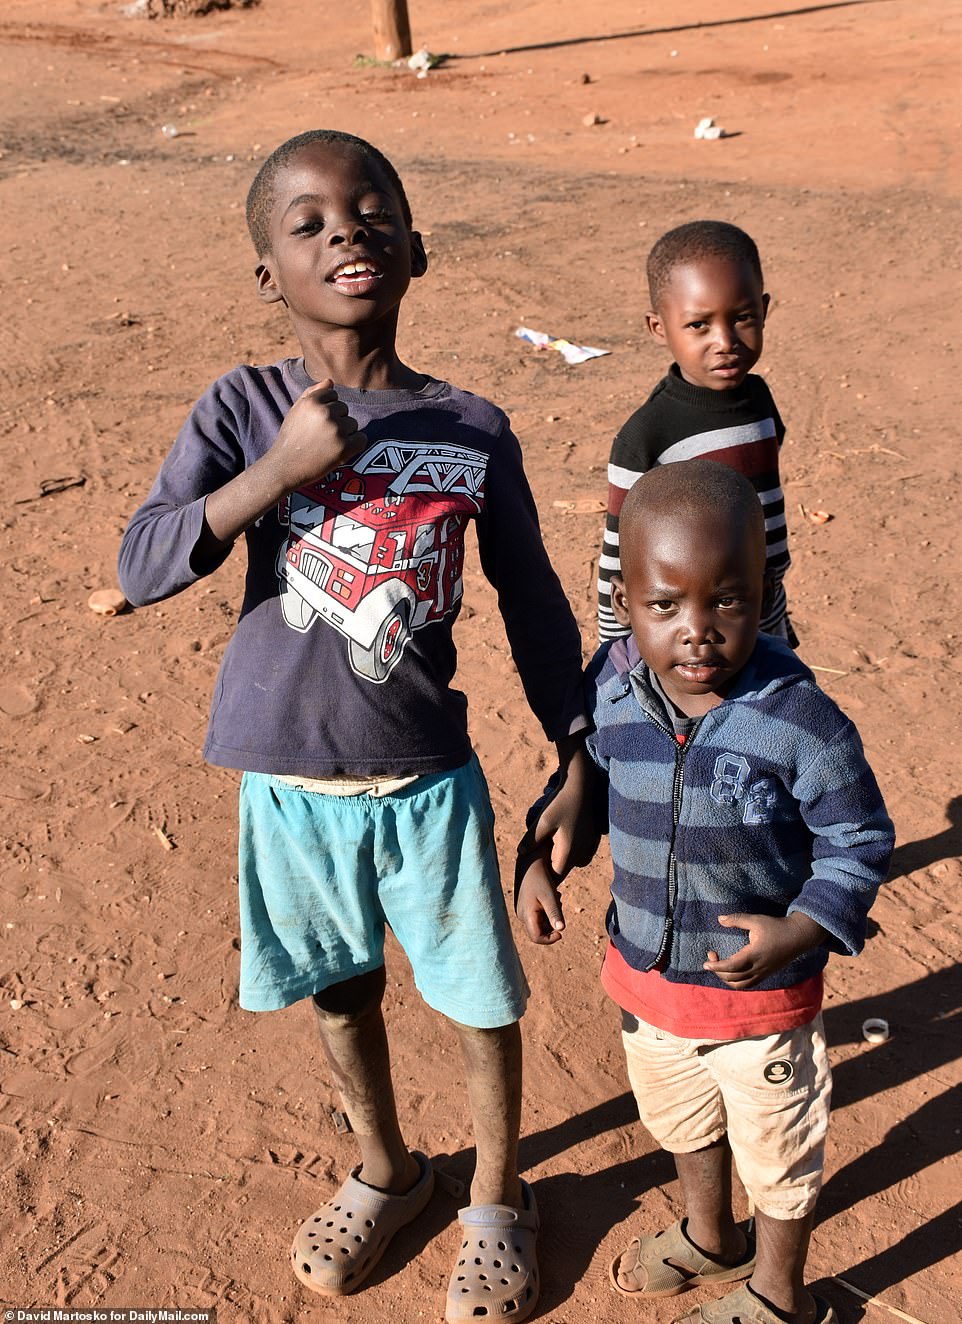 Off-brand Crocs and other sandals are the most common footwear, but about half of the kids were barefoot on one late June afternoon – the middle of Zambia